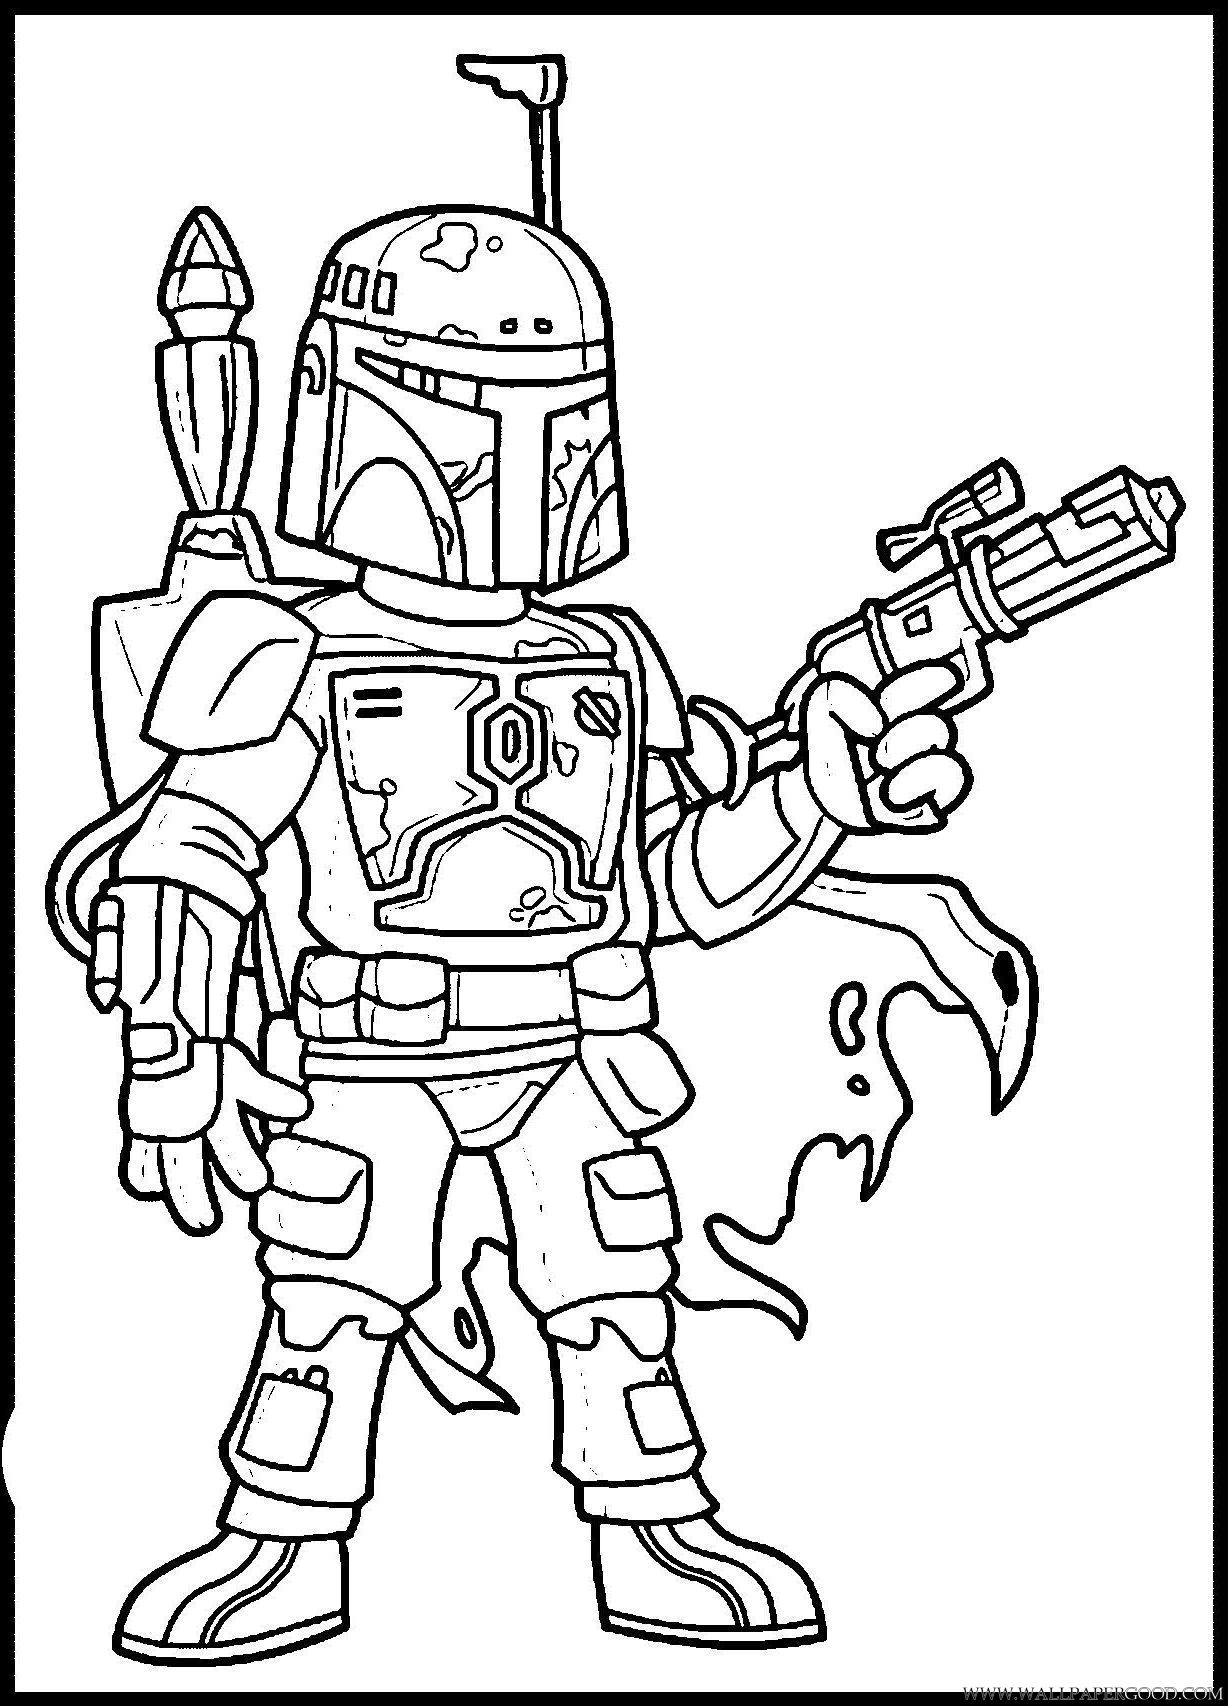 Download Free Printable Coloring Pages Lego Star Wars